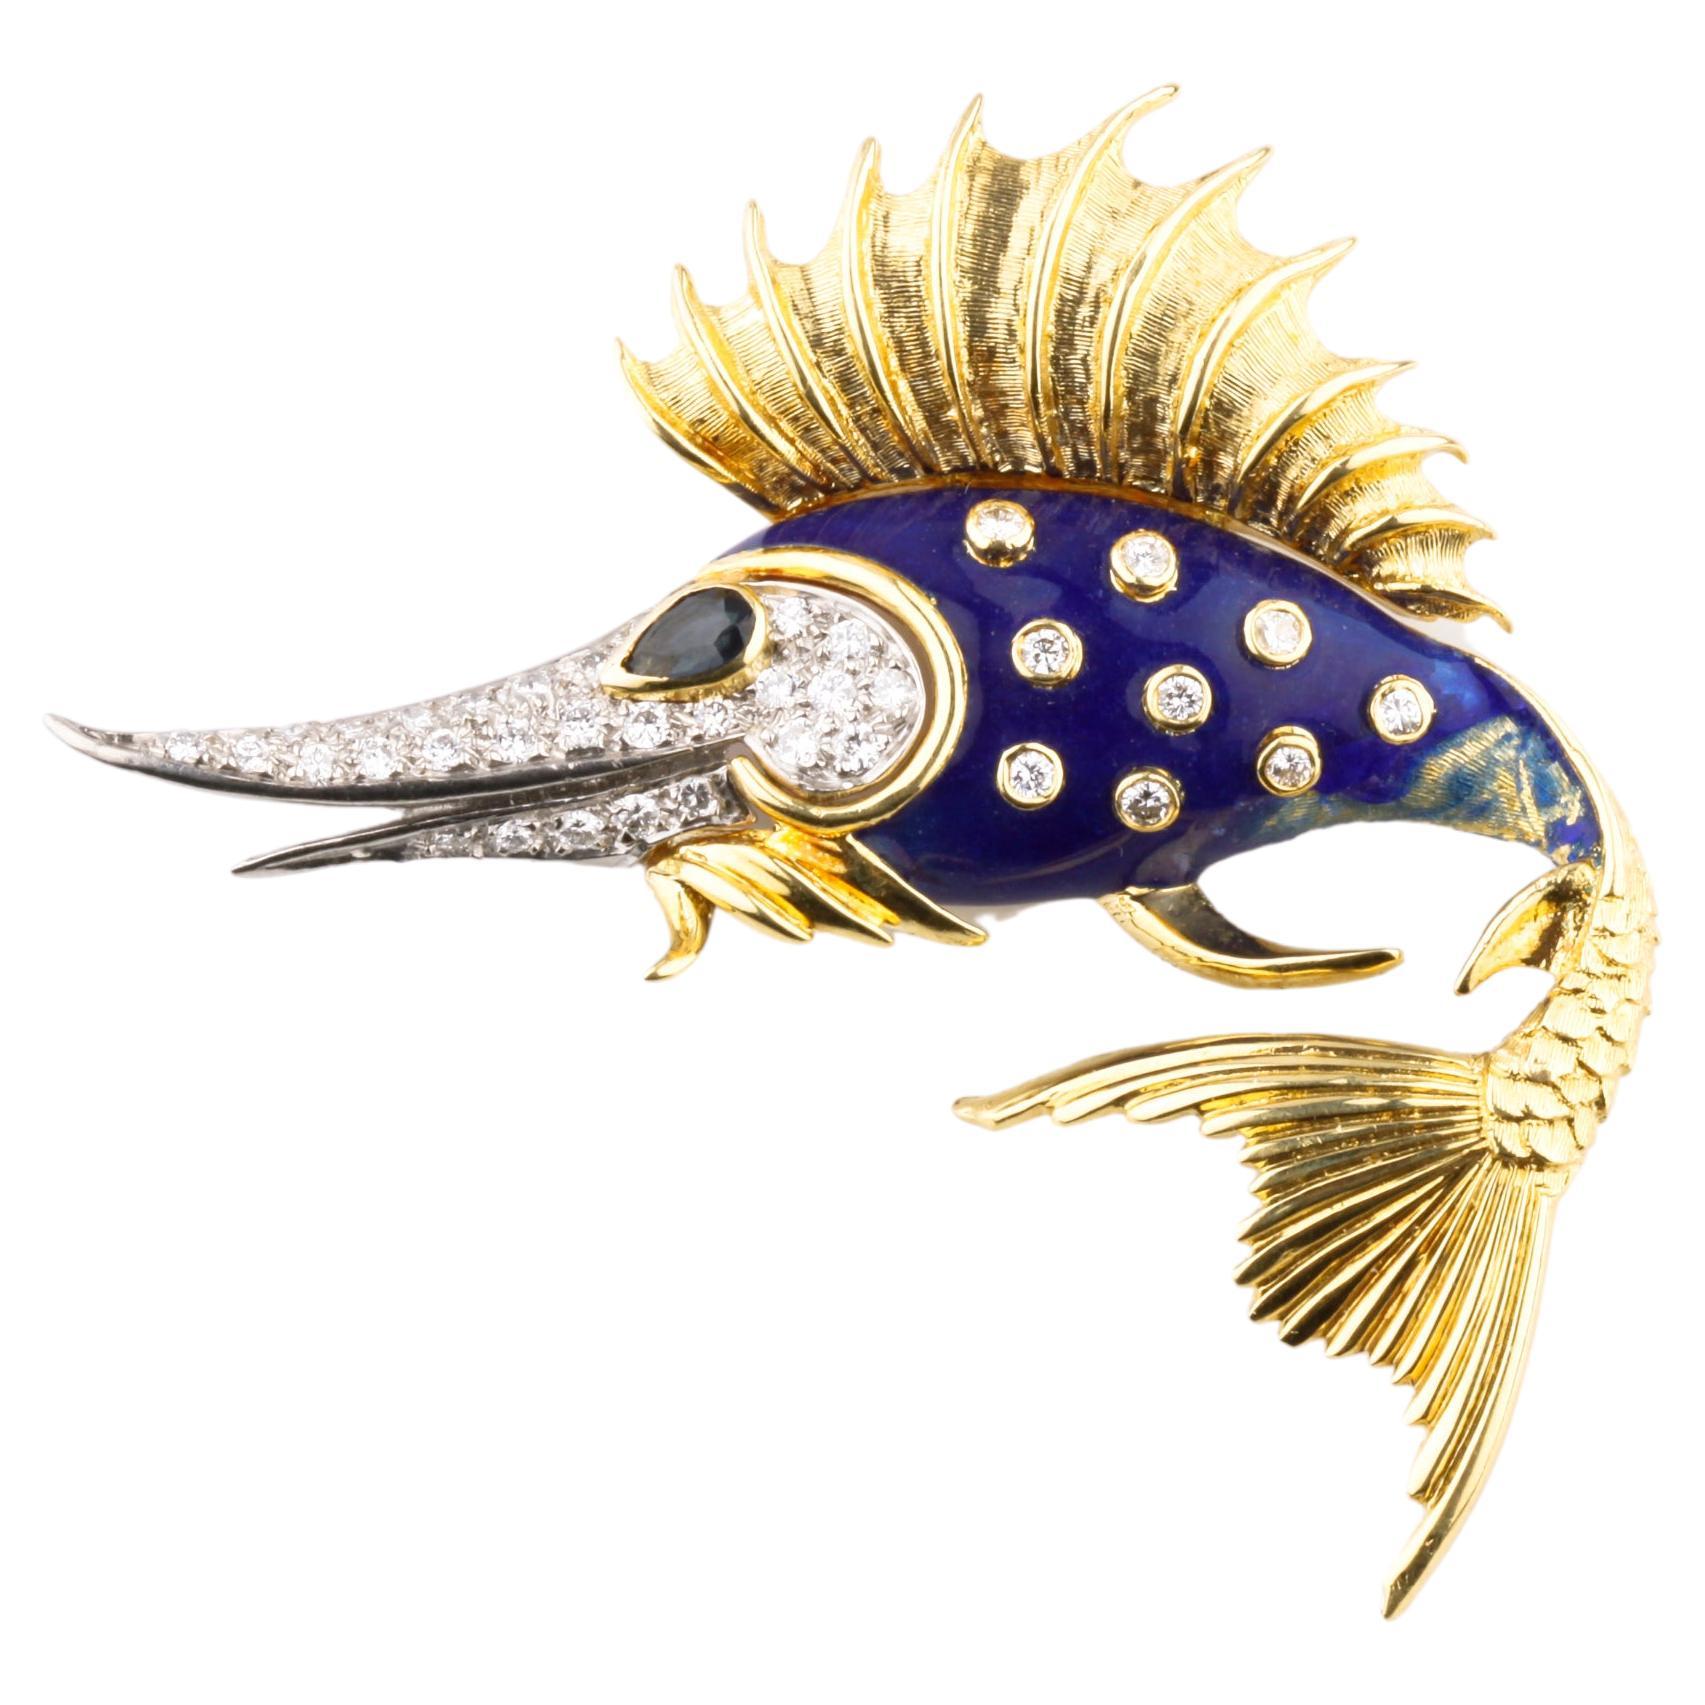 Rondette 18k Yellow Gold 0.90 Carat Diamond Sailfish Enamel Brooch with Sapphire For Sale